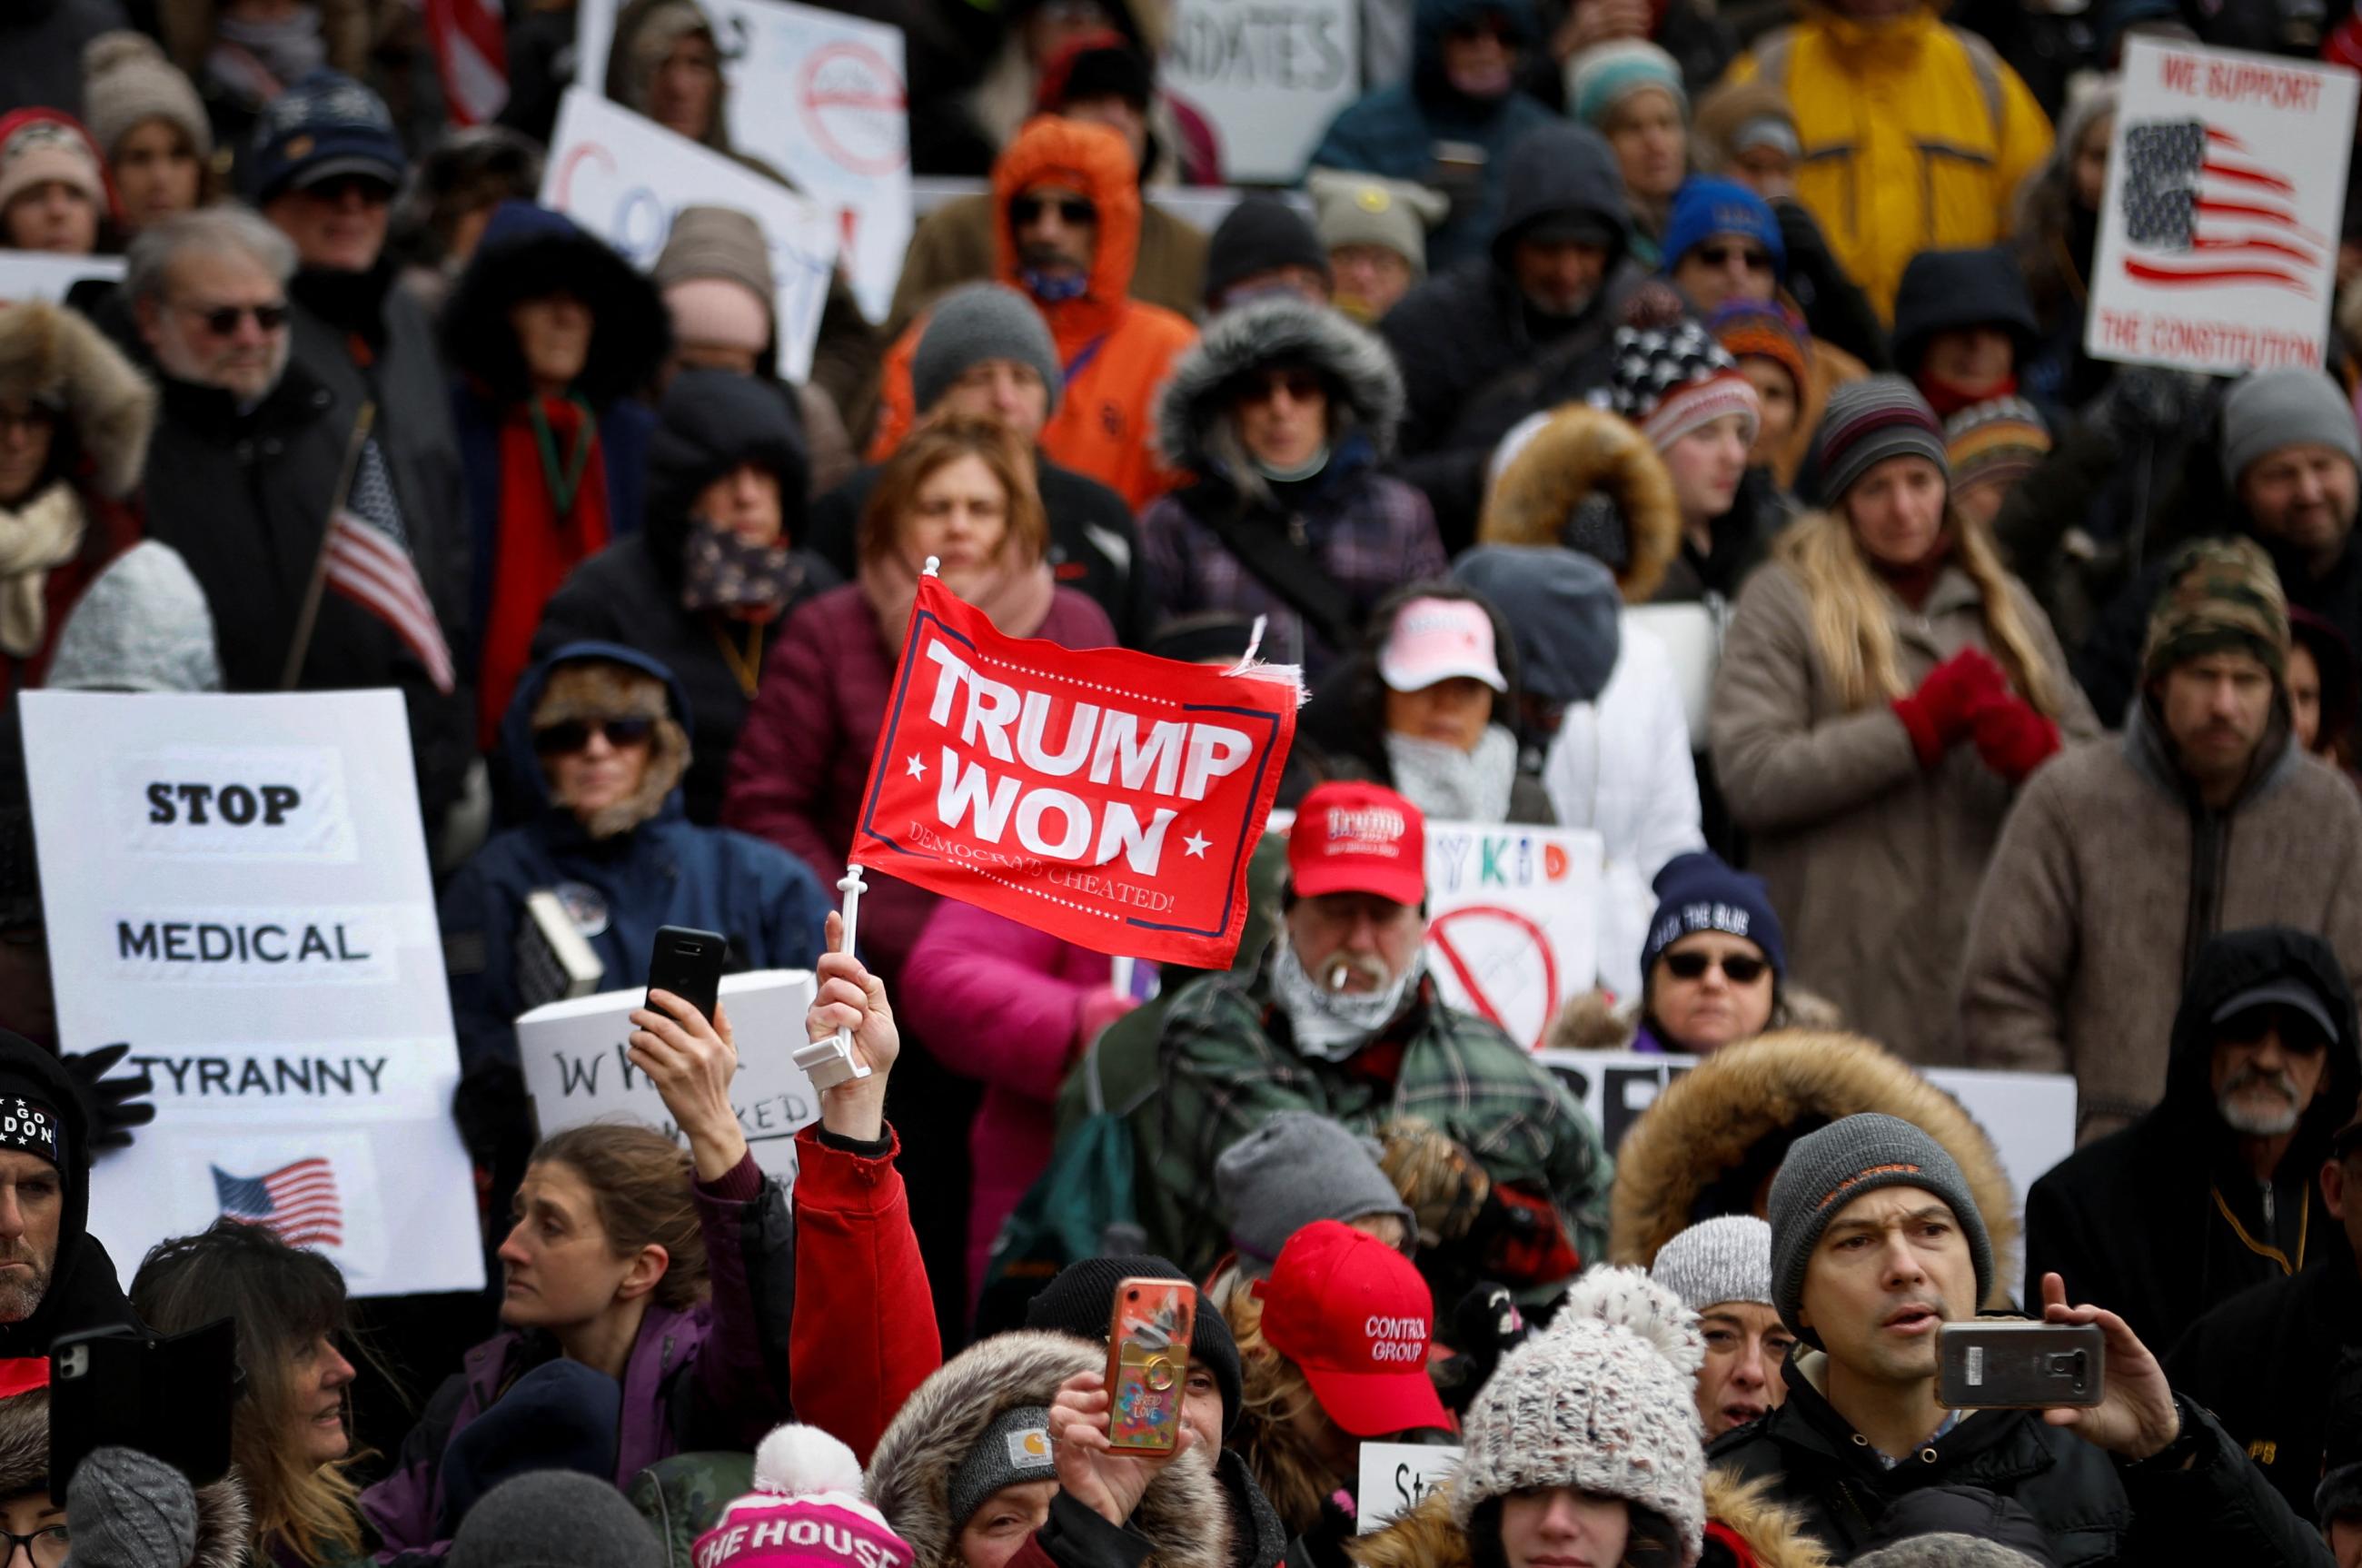 A man holds up a flag reading "Trump Won" in the crowd as protestors demonstrate outside the New York State Capitol in Albany against mandates for the vaccines against the coronavirus disease (COVID-19), January 5, 2022. 